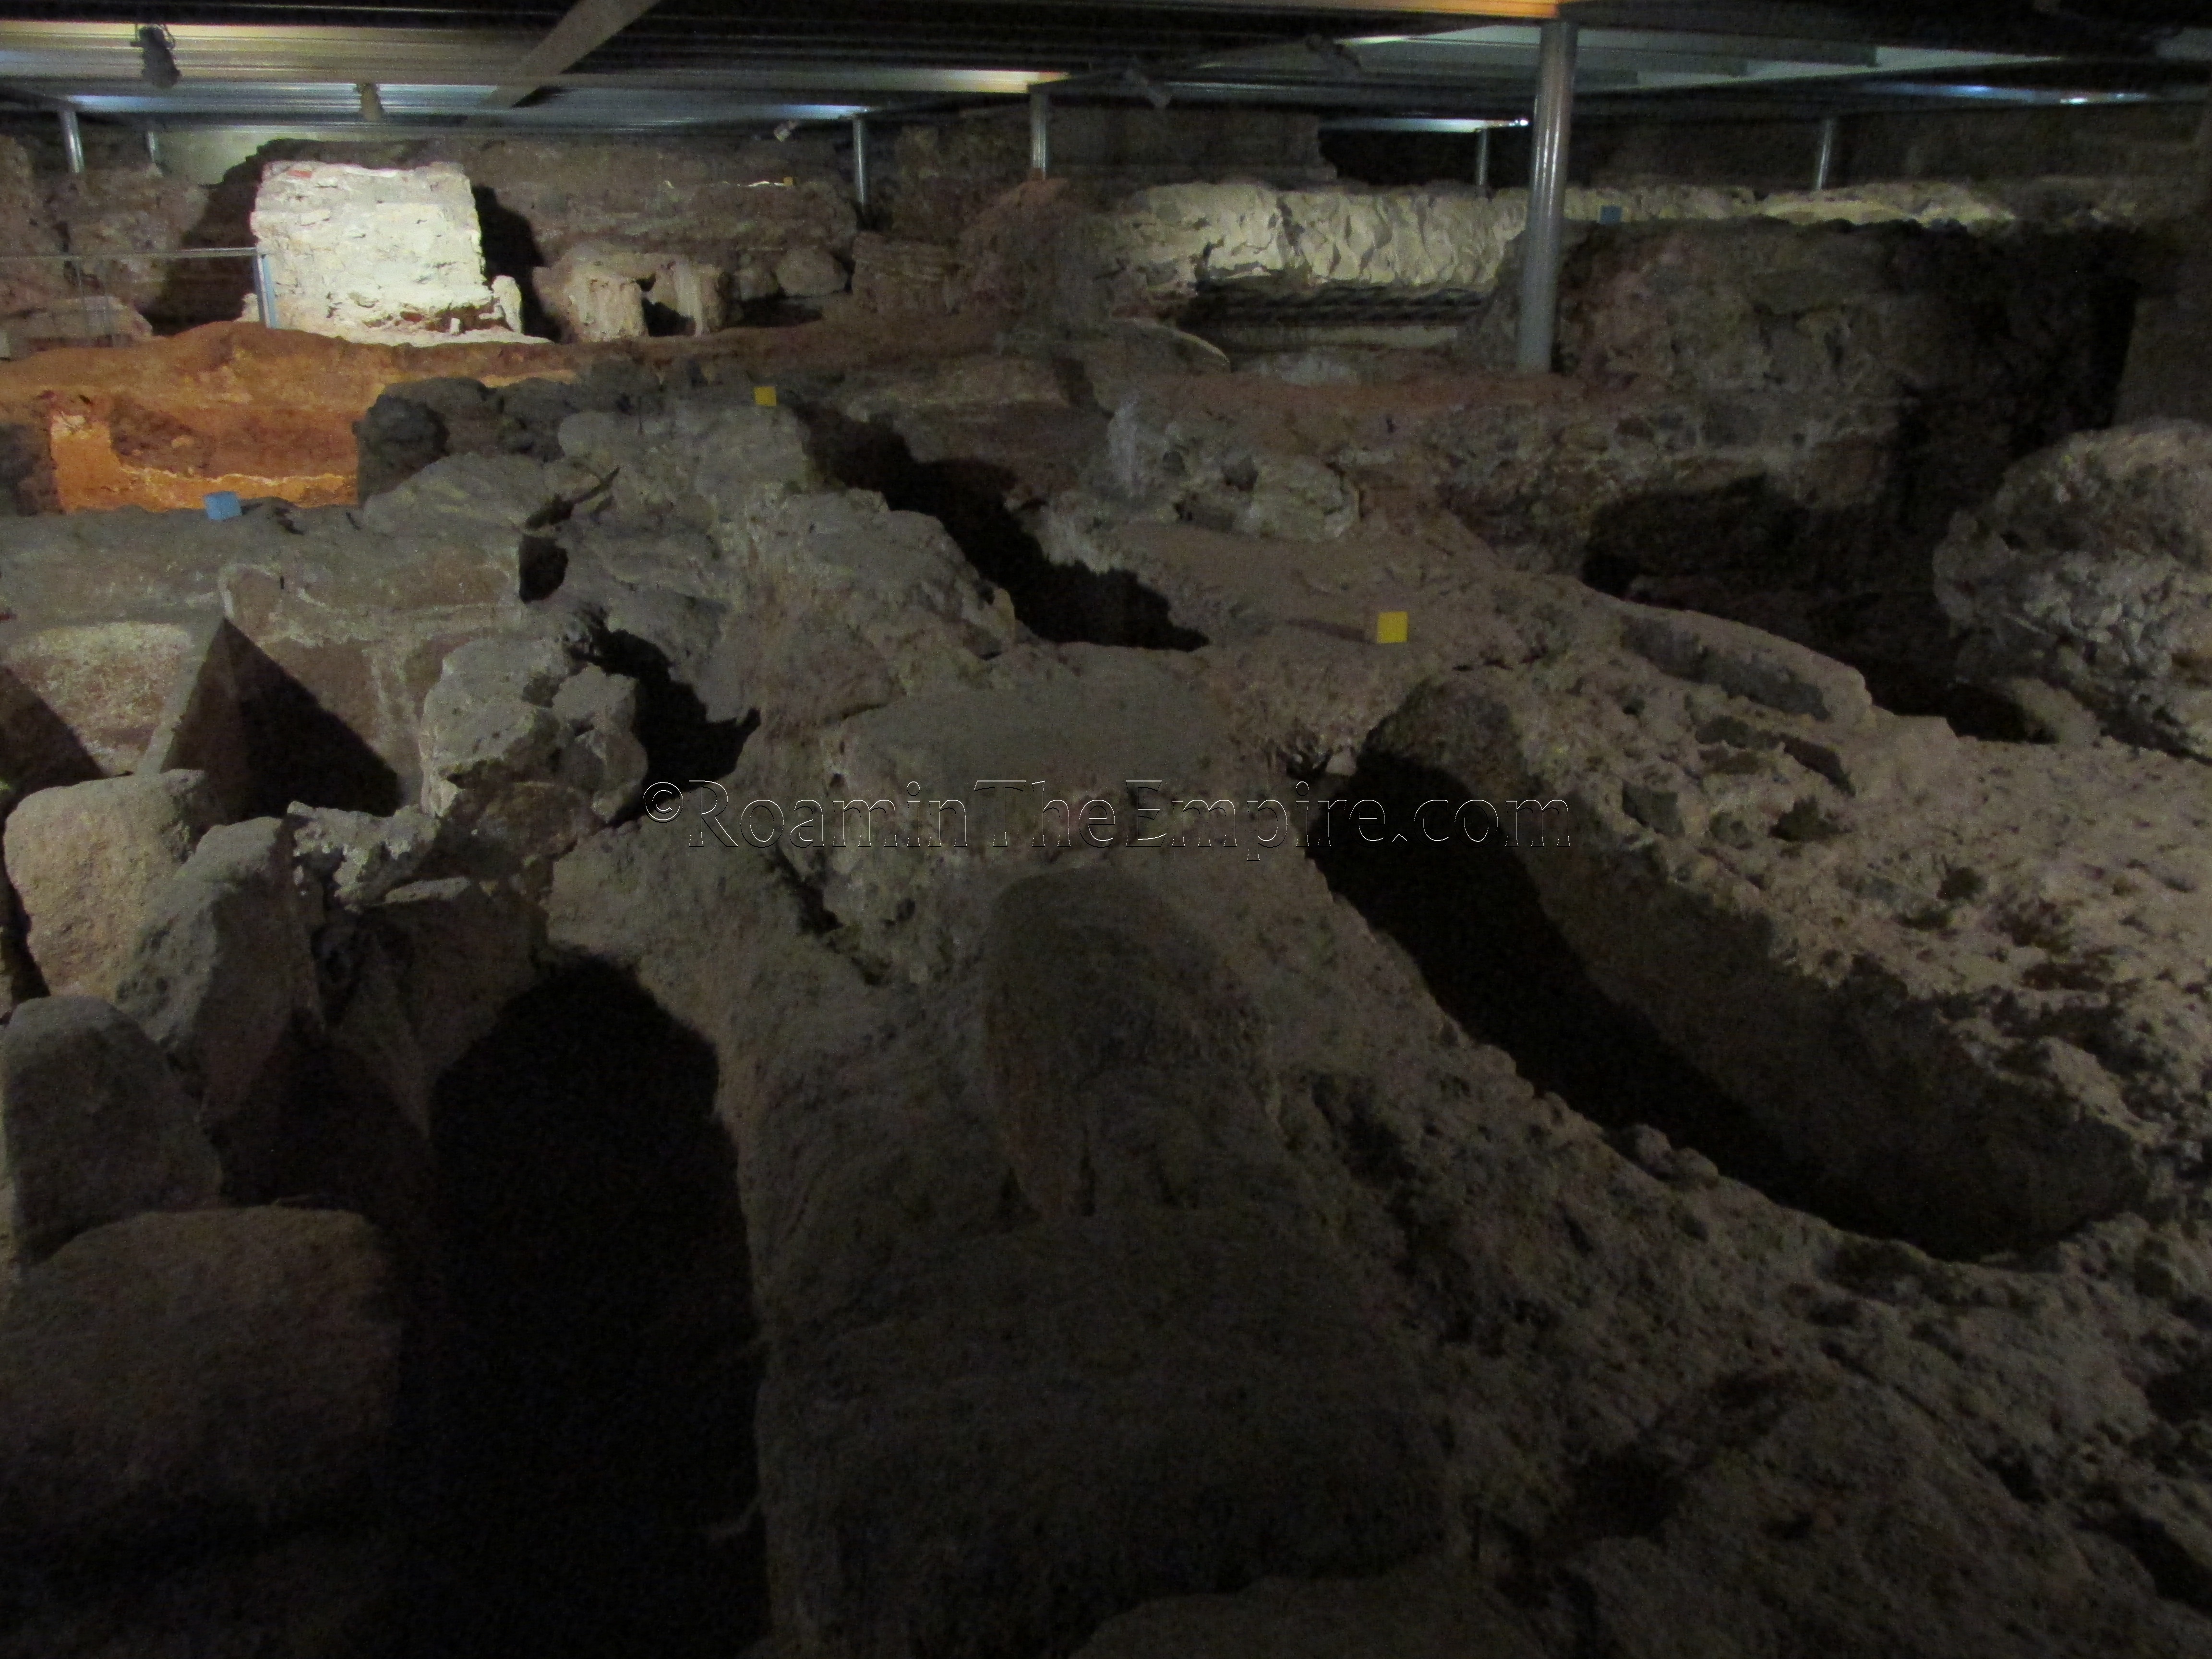 Area of the Roman house's peristyle with subsequent early Christian burials.